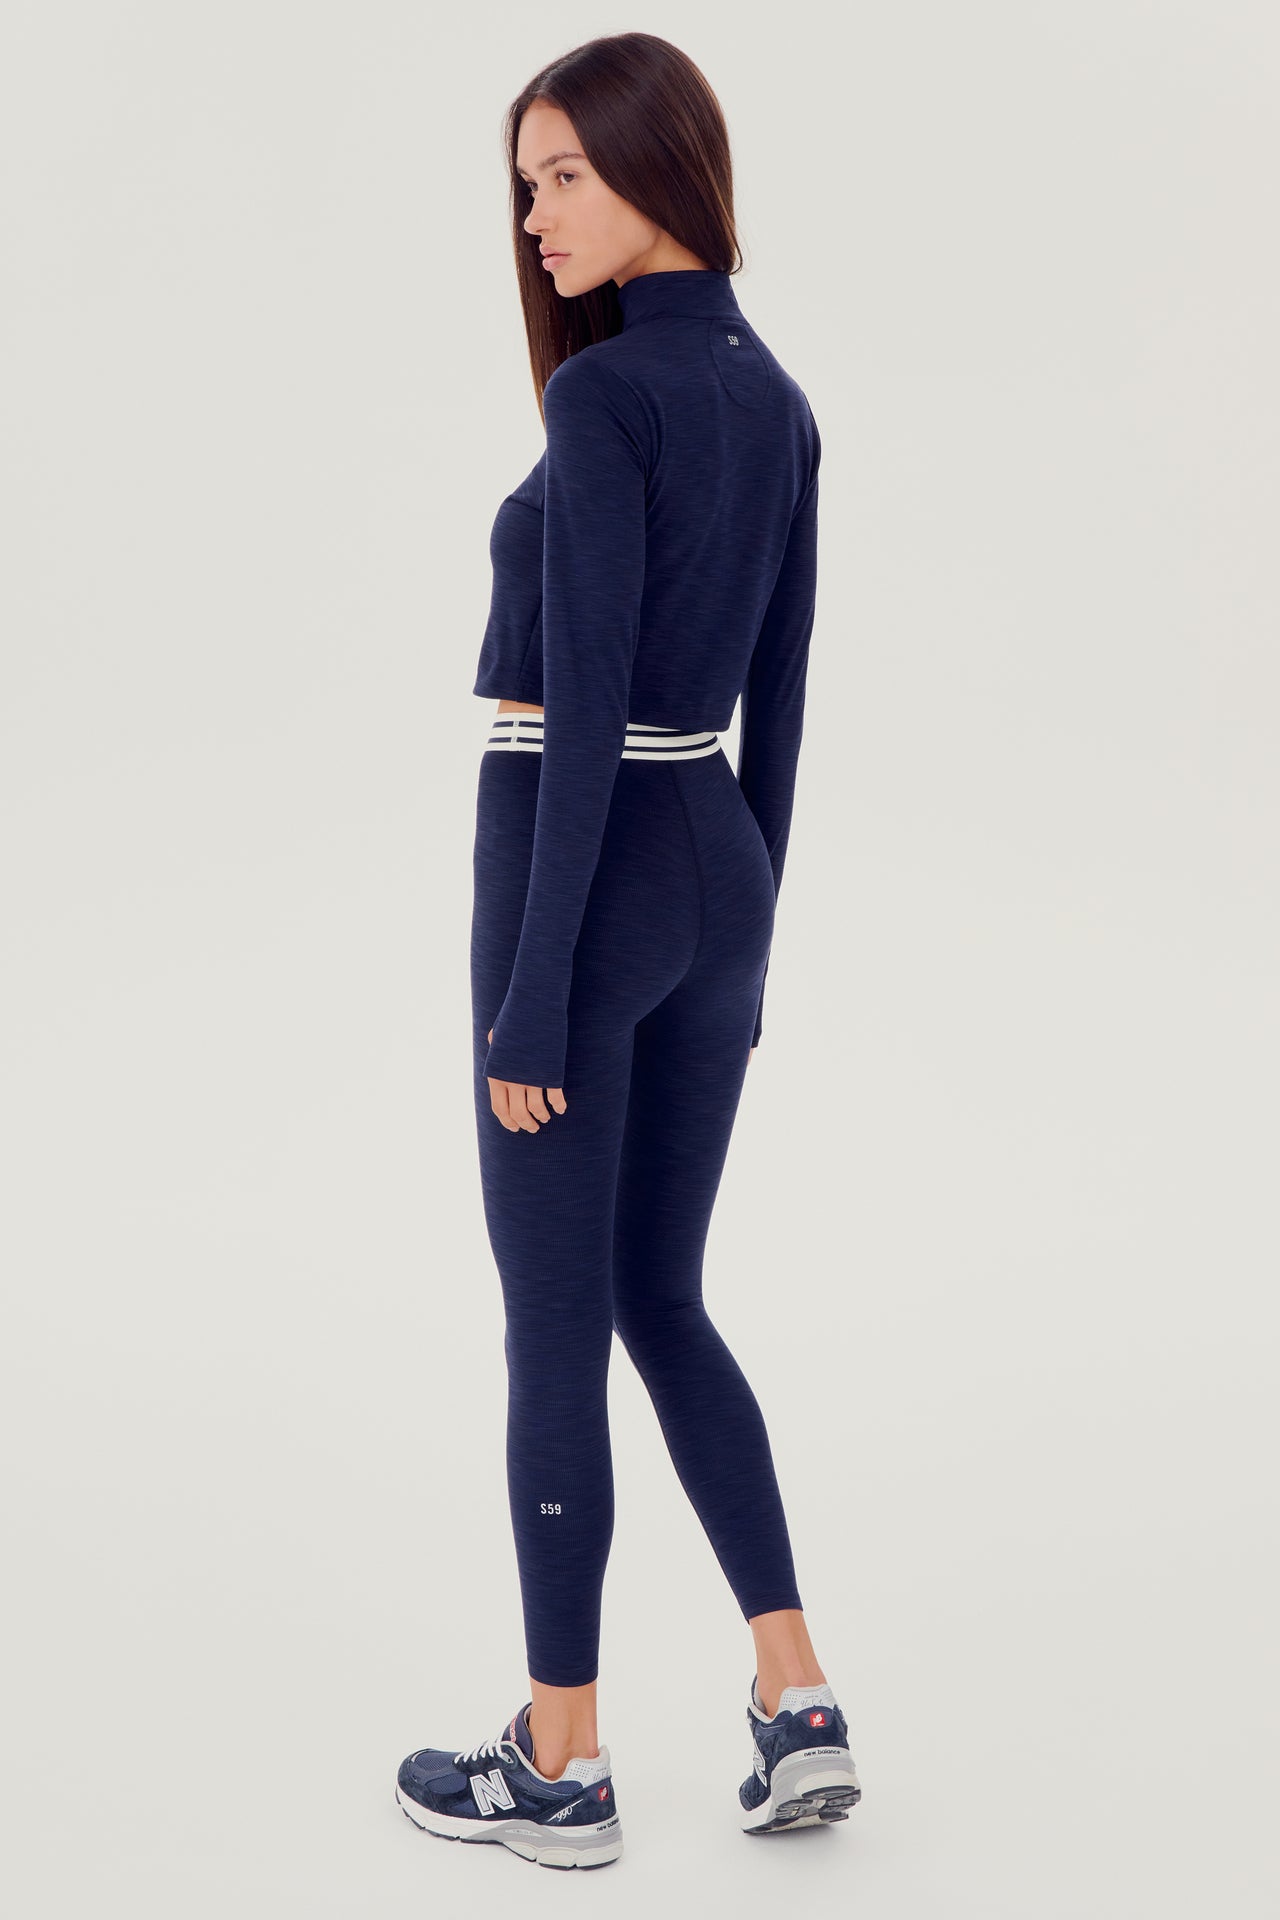 Back full view of woman with brown straight hair wearing a dark blue cropped sweatshirt with collar, and dark blue leggings with white and dark blue stripes on the waistband and wearing white and dark blue shoes